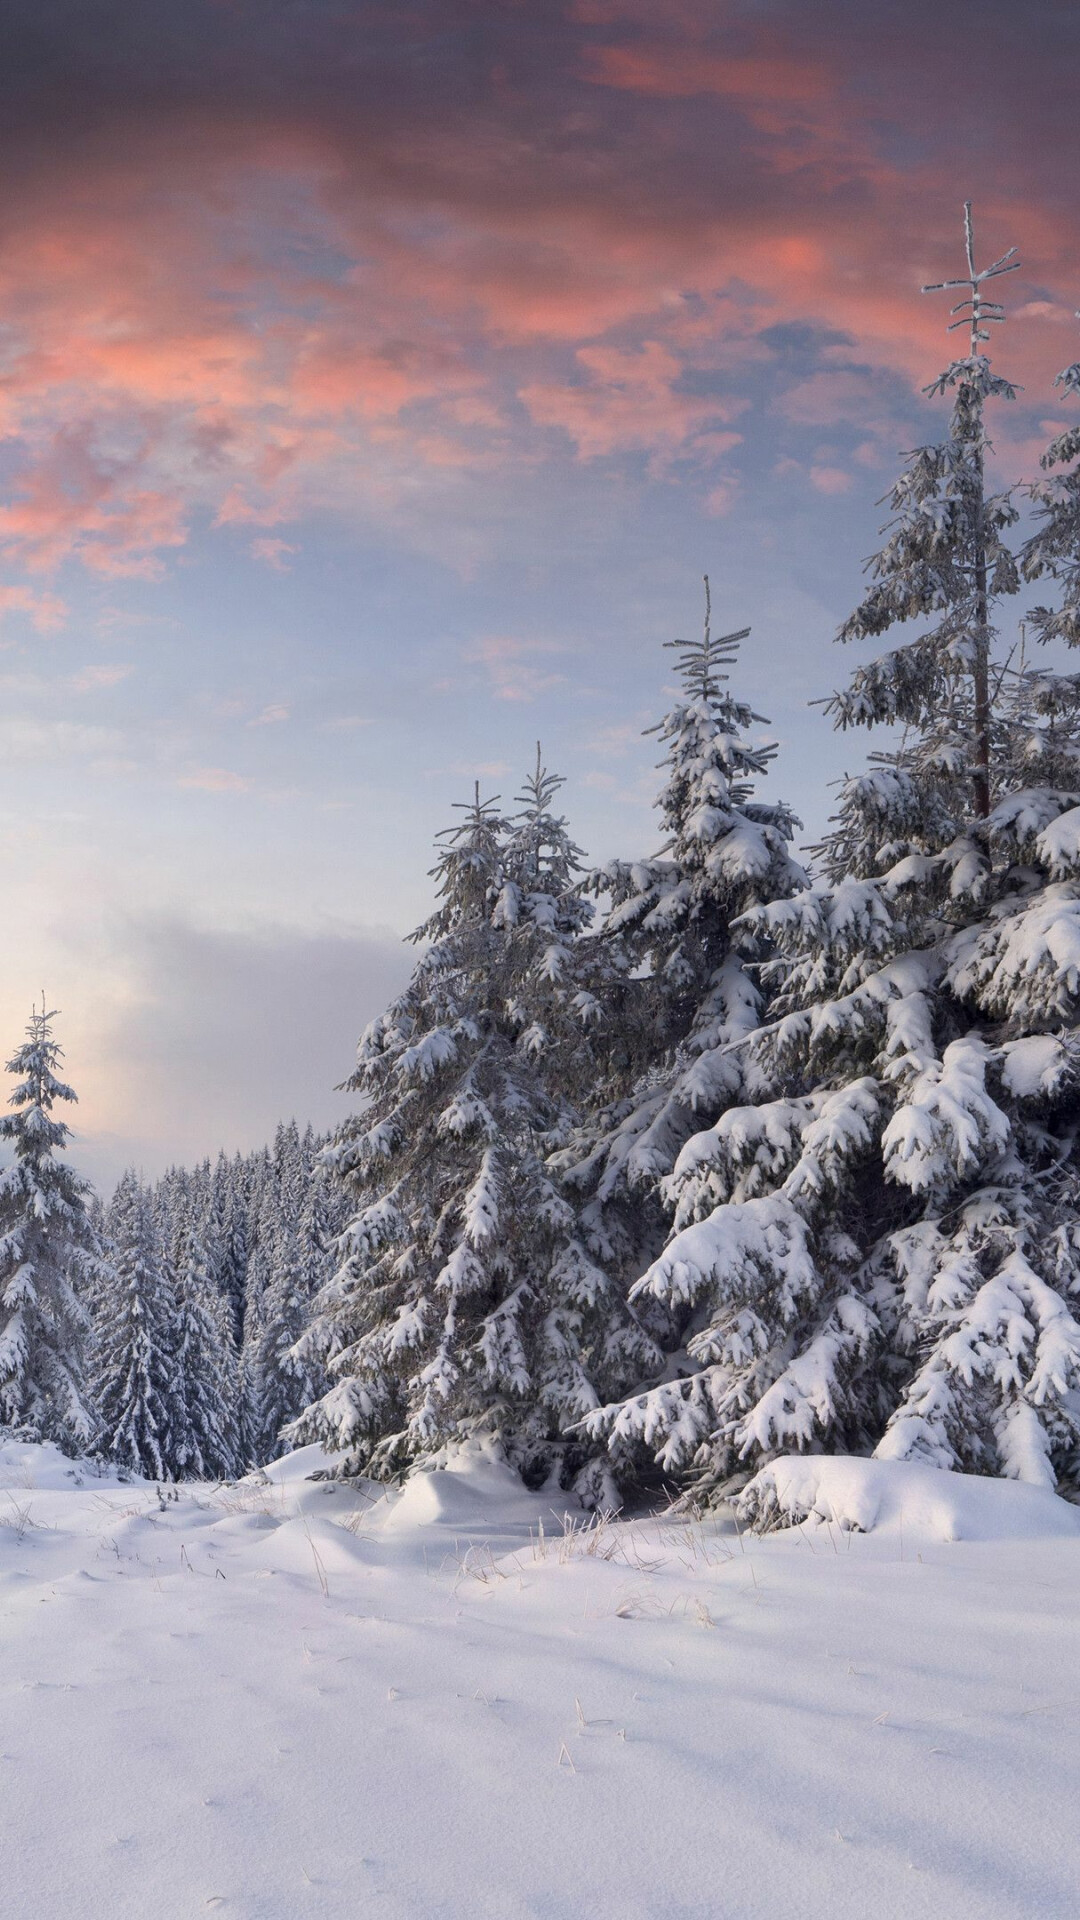 Winter: Seasonal changes, Snow cover, Wintry landscape. 1080x1920 Full HD Background.